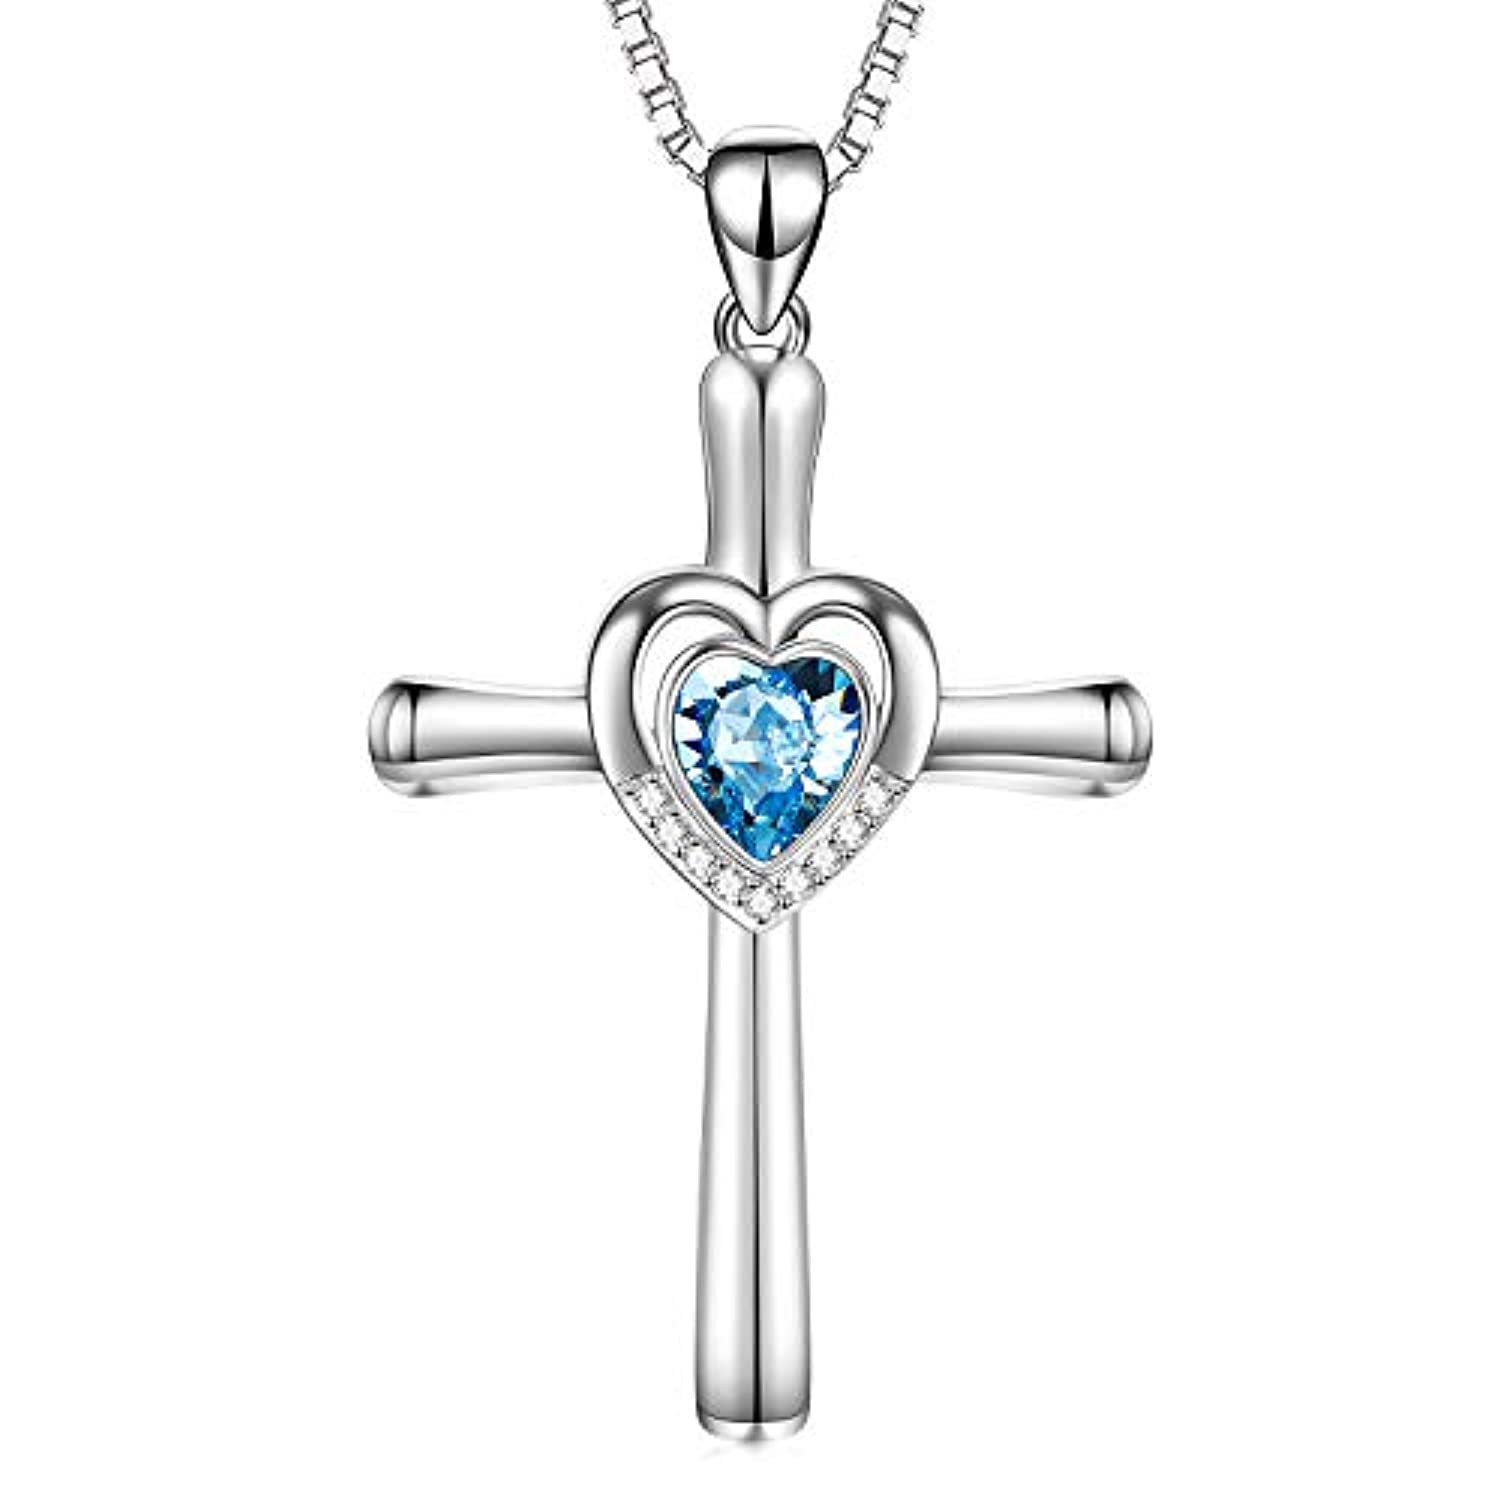 Buy Sterling & Swarovski Cross Necklace AB Swarovski Crystal Bead Cross  About 1.75 With 18 Inch Sterling Silver Necklace Online in India - Etsy